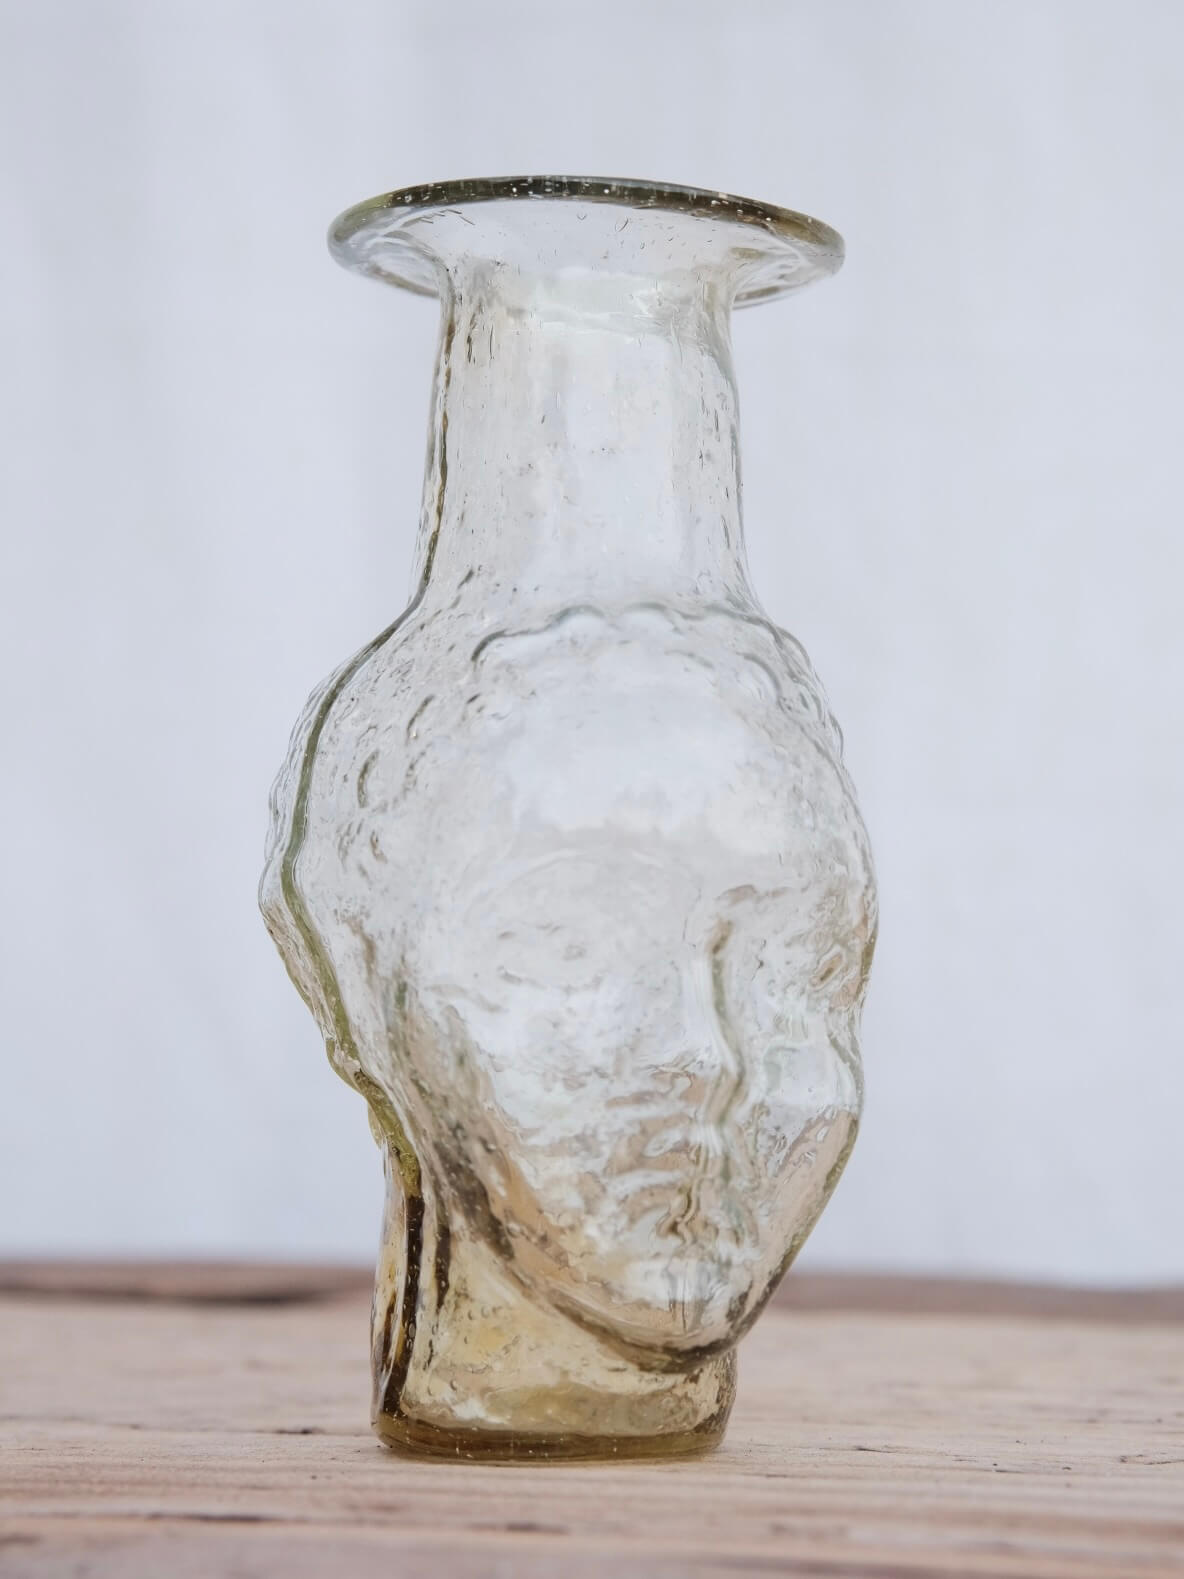 Small clear glass vase in the shape of a head. Use it as a vase, candleholder or creamer. Handblown in Paris by La Soufflerie.